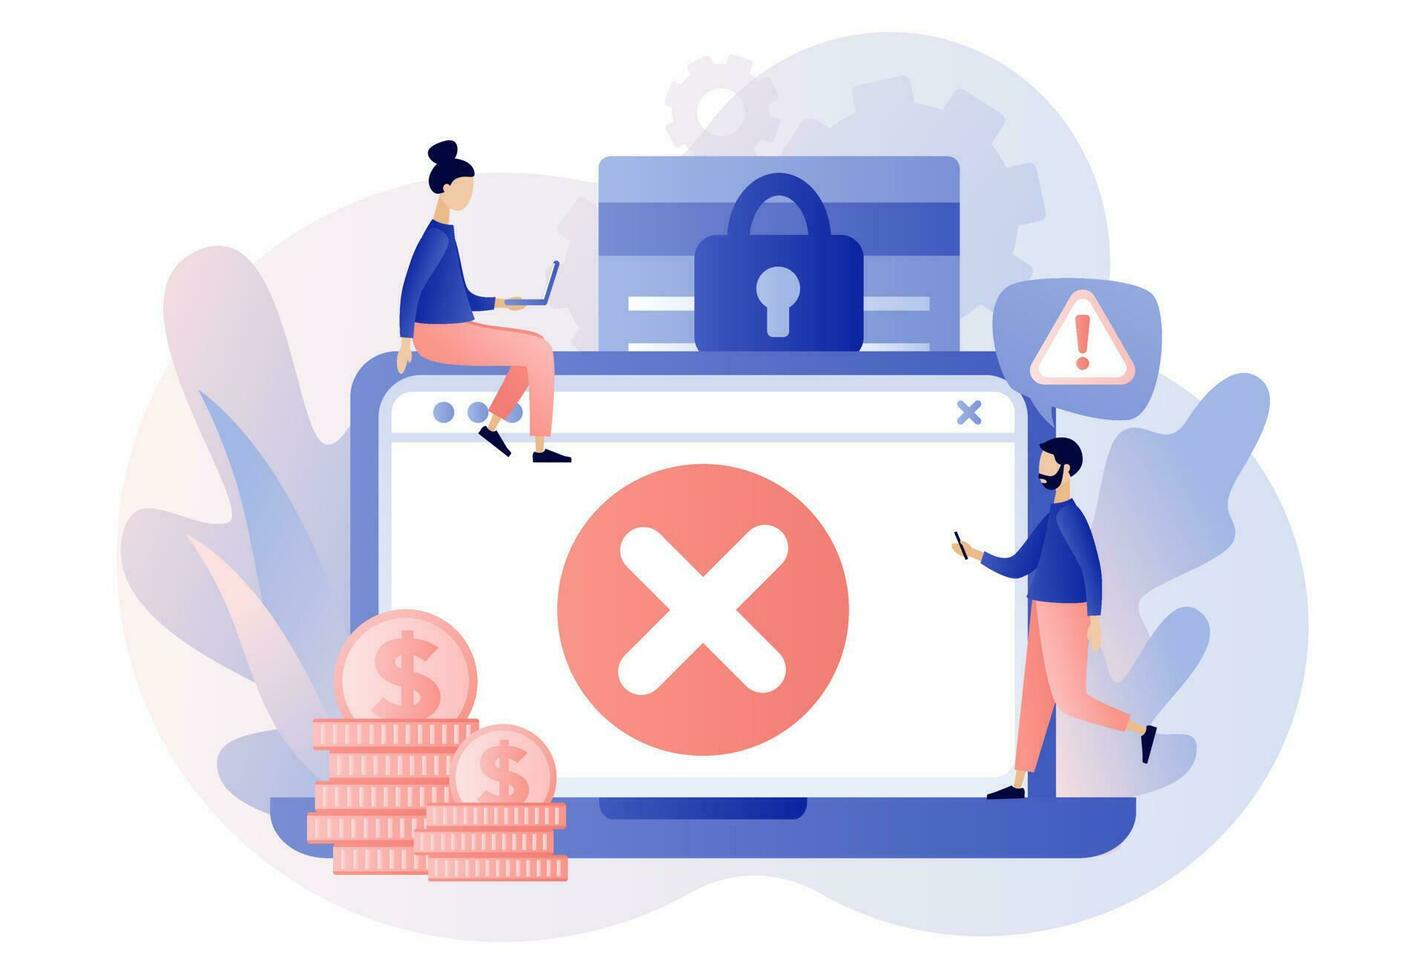 Payment error. Cashless NFC payment failed. Online transaction canceled. Try again. Web site with cross checkmark. Modern flat cartoon style. Vector illustration on white background